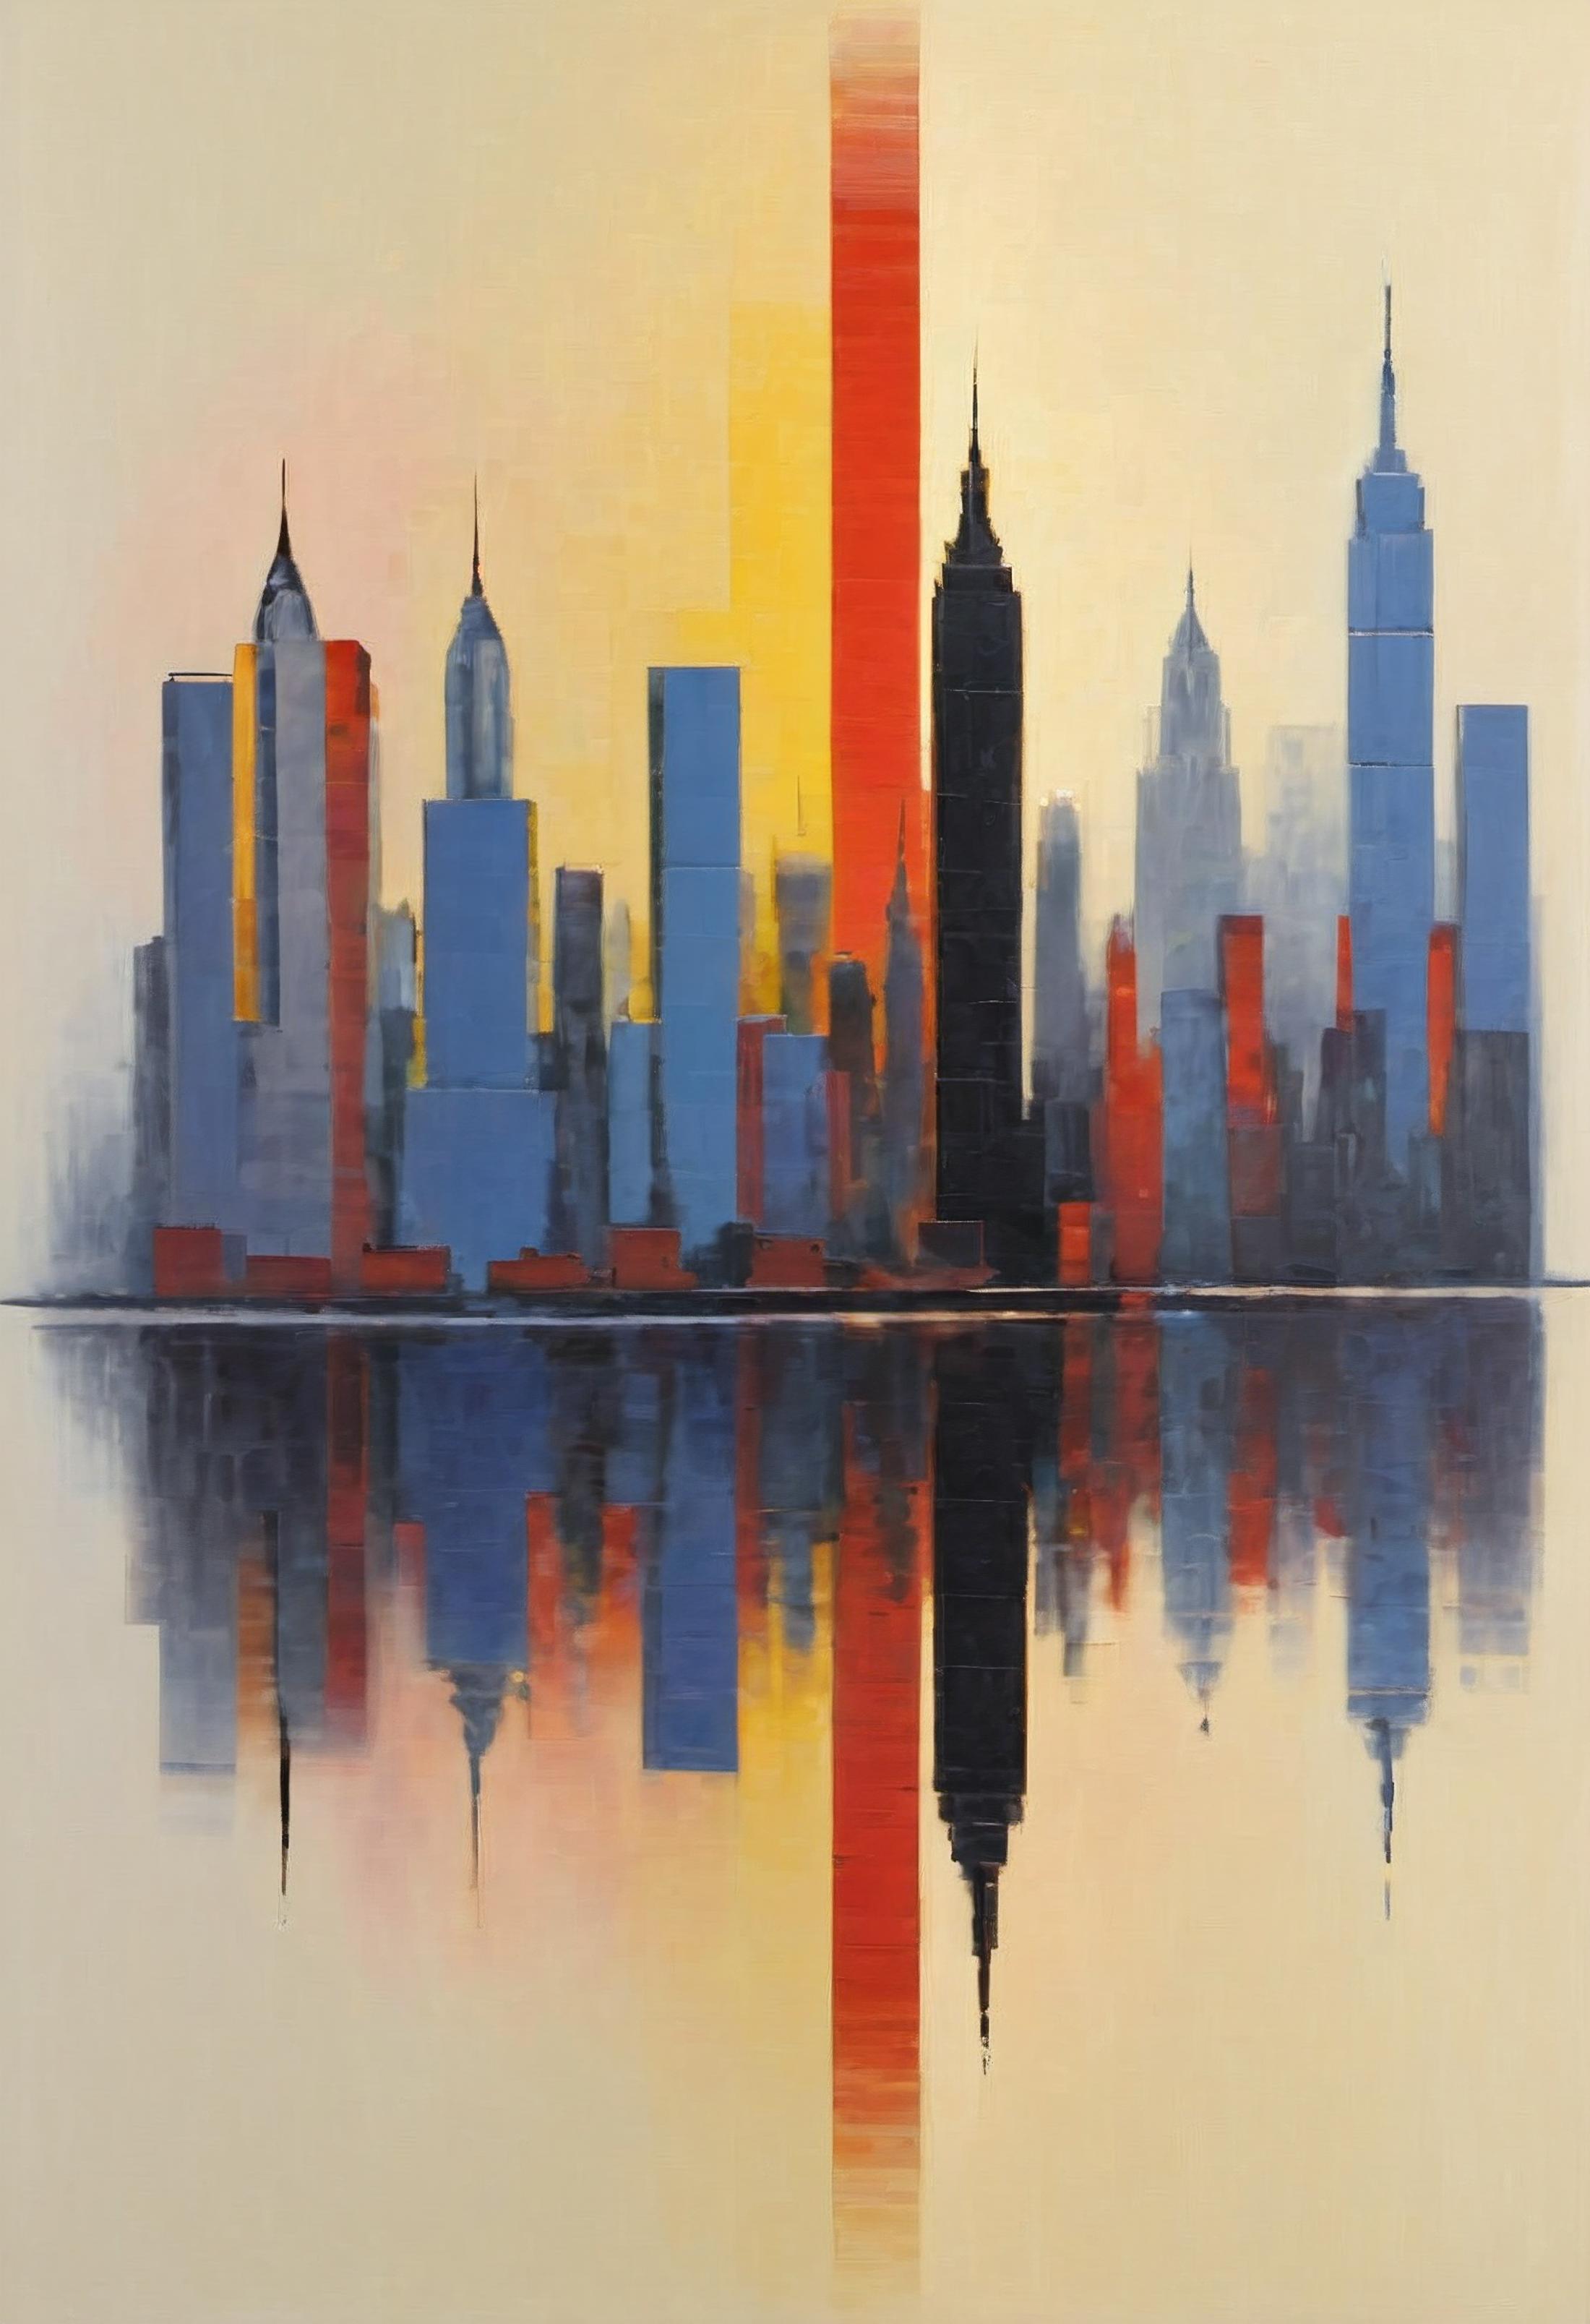 Artistic Cityscape Painting with Reflection of Buildings in Water